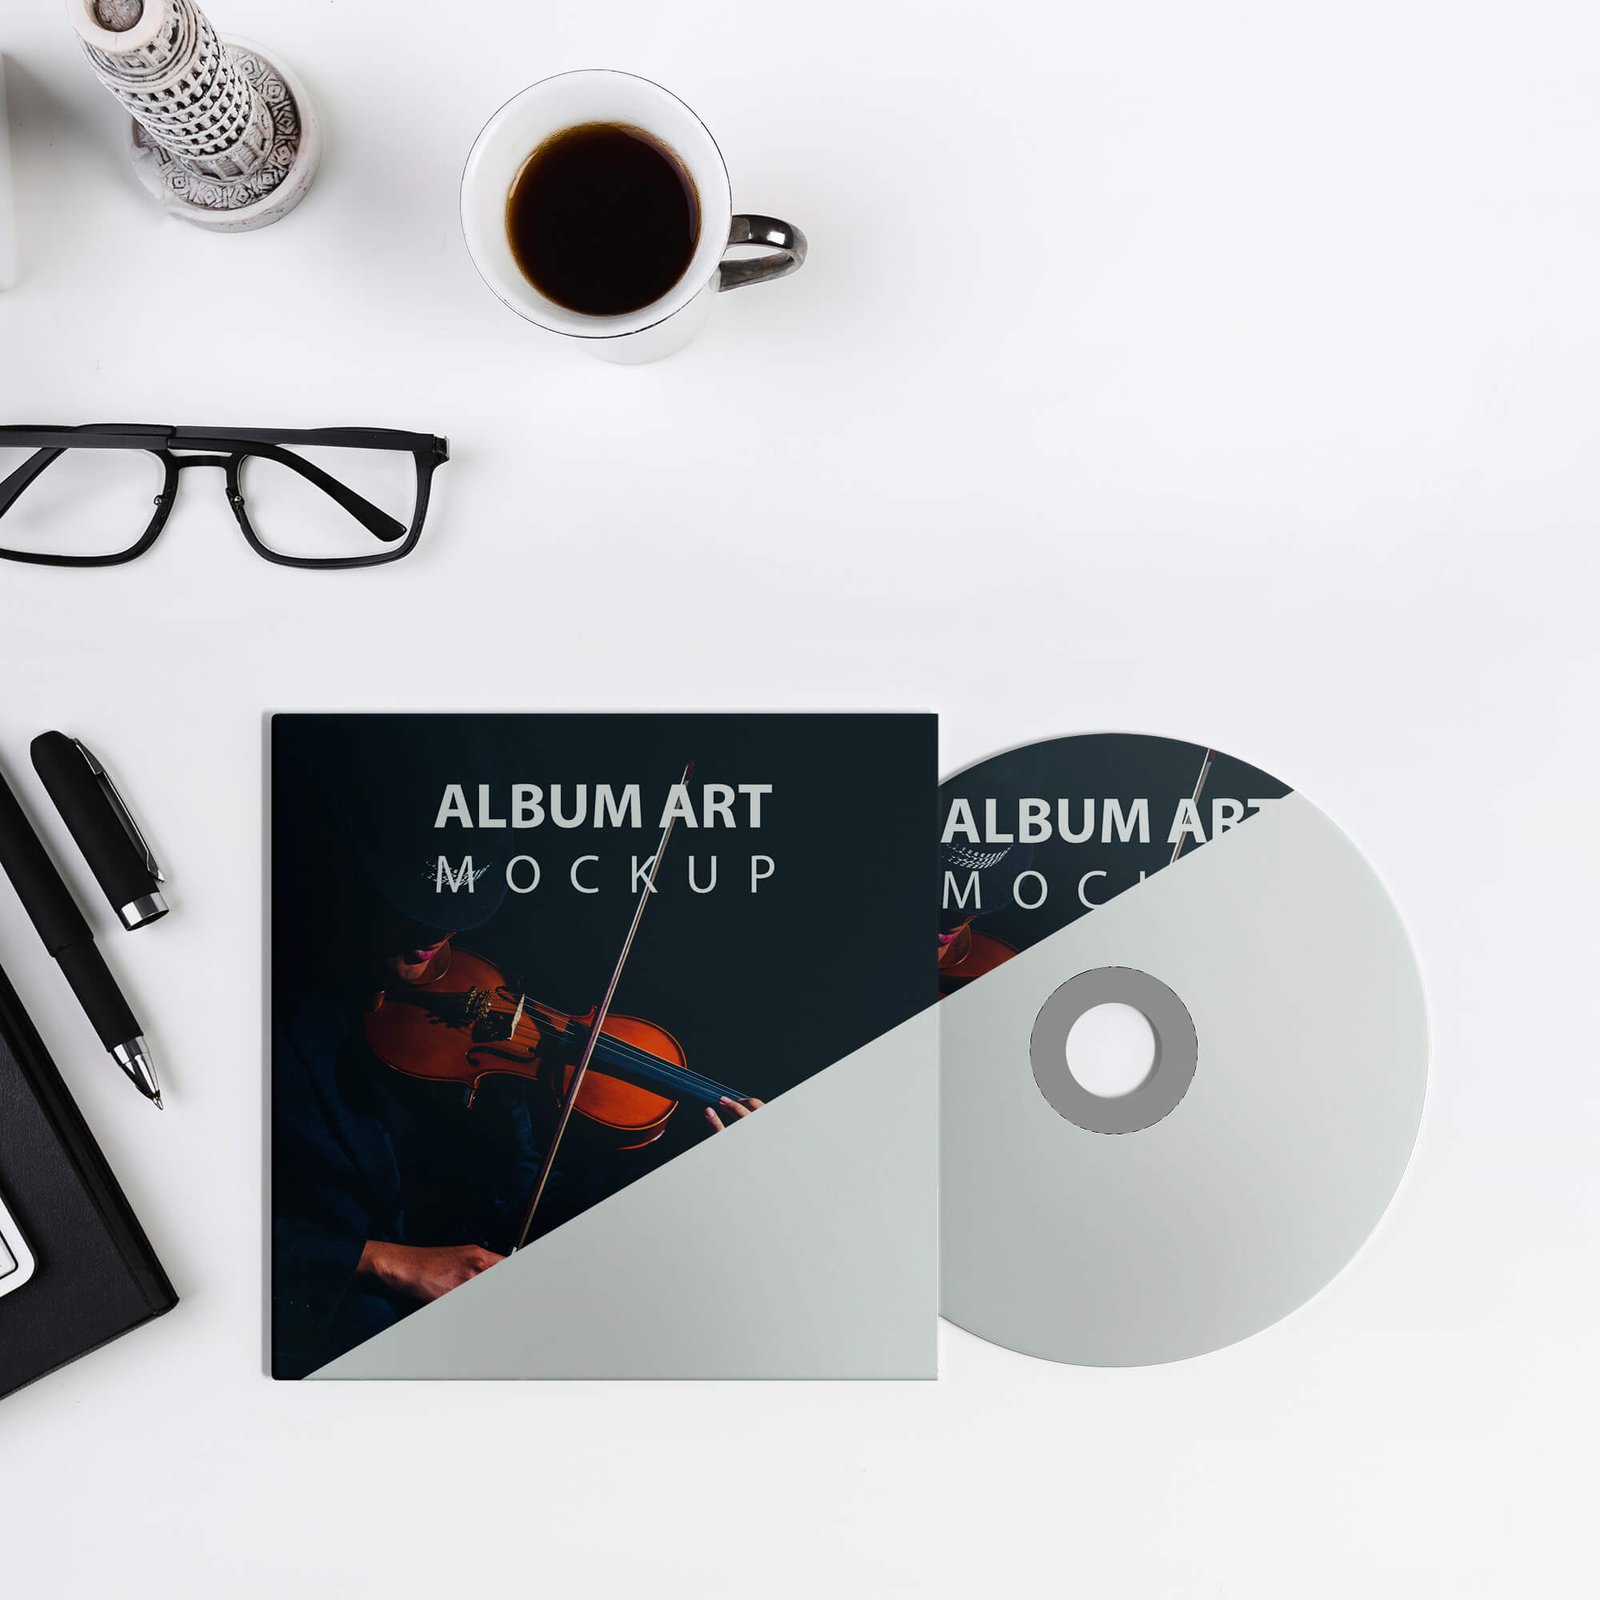 Download 25 Stunning Album Cover Mockup Free Psd Templates